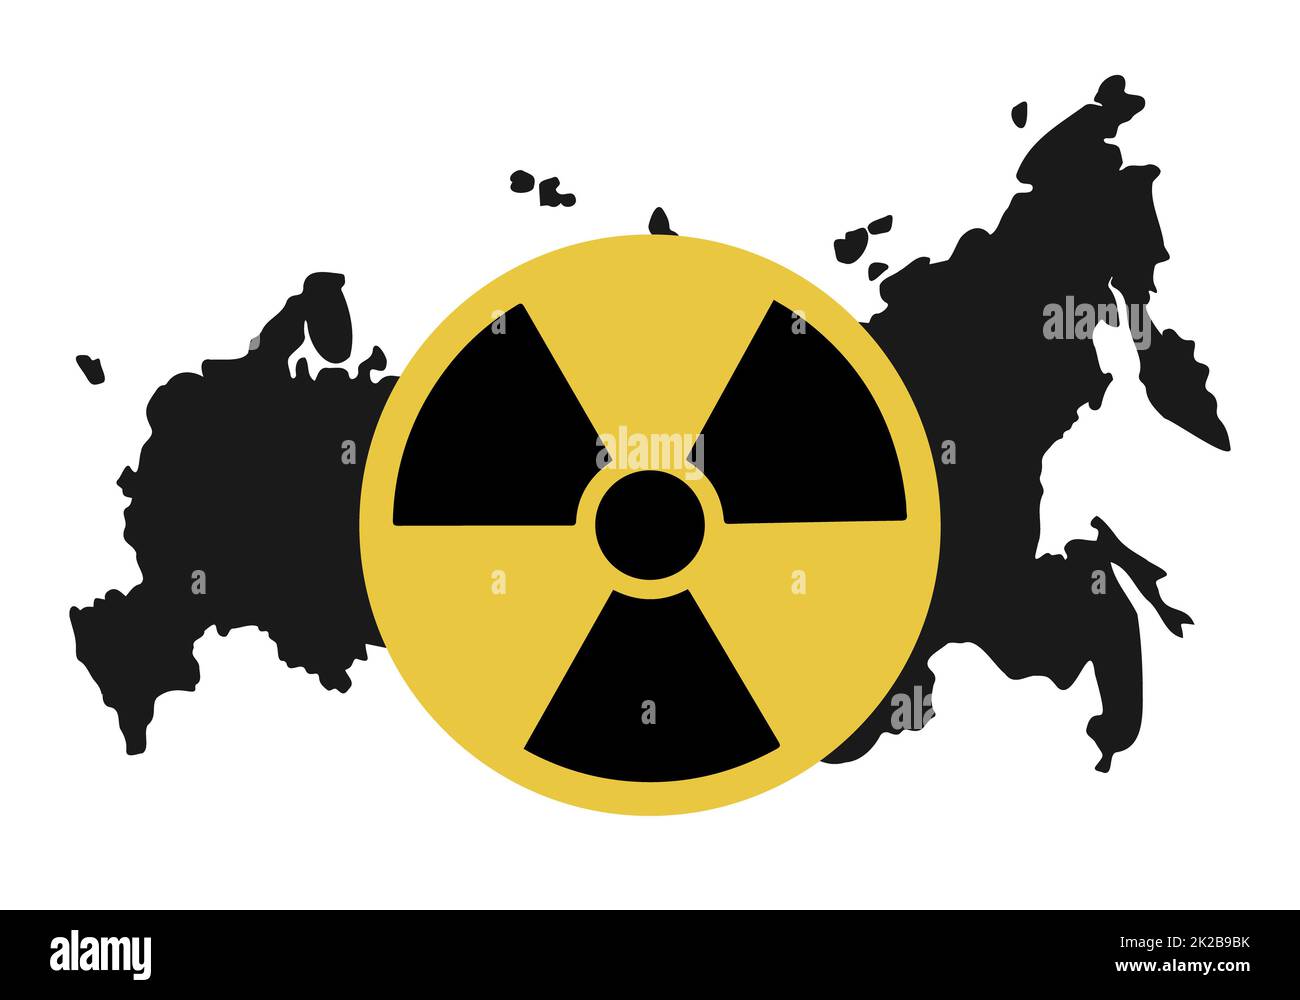 Stop nuclear weapons - concept banner. Atomic bomb sign on the map of russia. Russian nuclear weapons of mass destruction must not be used. Stop the war in Ukraine and on earth. Vector illustration. Stock Photo